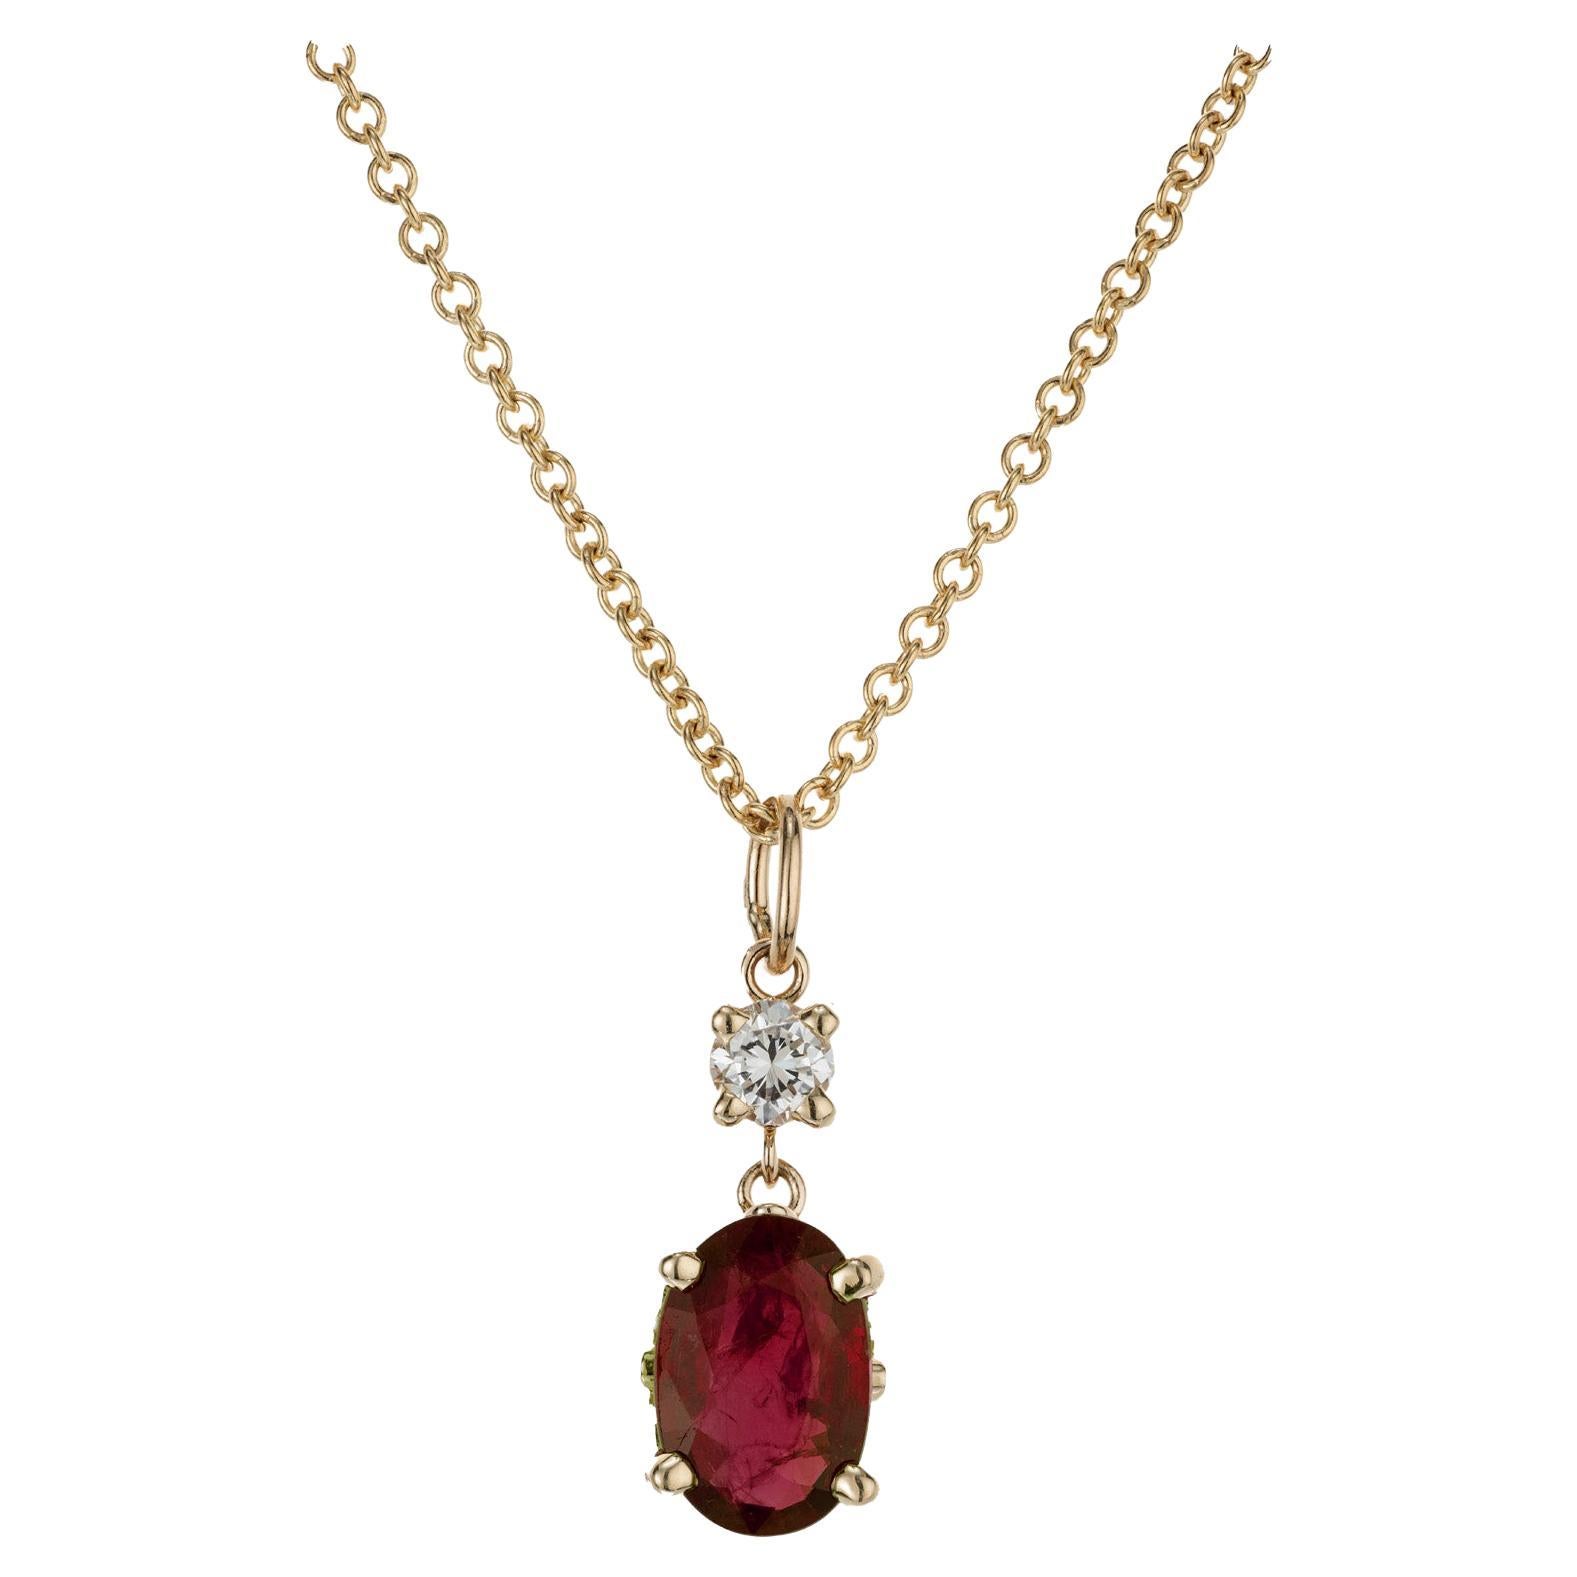 Peter Suchy GIA Certified 1.20 Ruby Diamond Yellow Gold Pendant Necklace For Sale